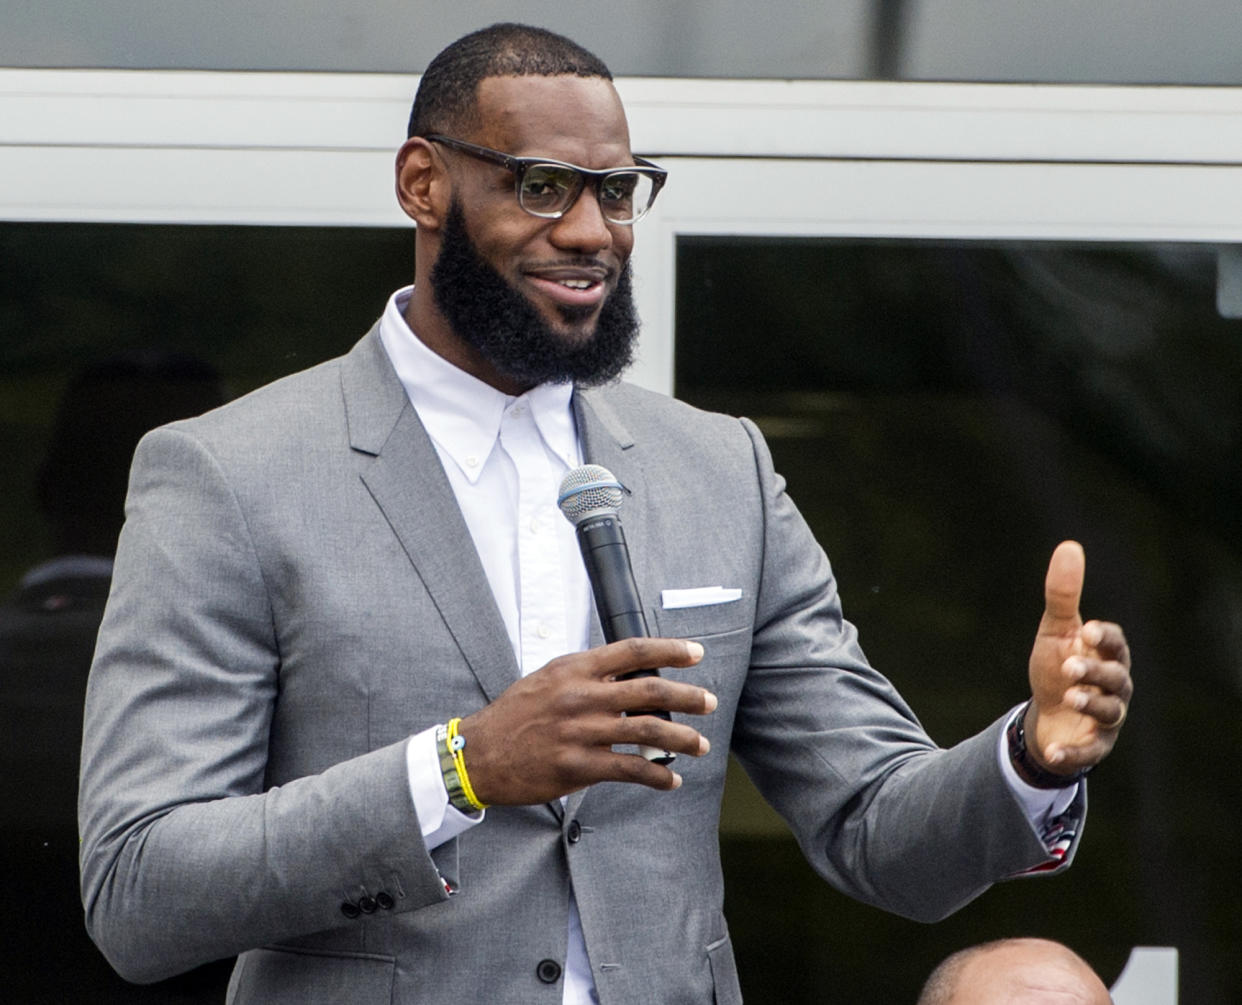 The first graduating class from LeBron James' I Promise Network are eligible for a tuition-free college education. (AP Photo/Phil Long, File)